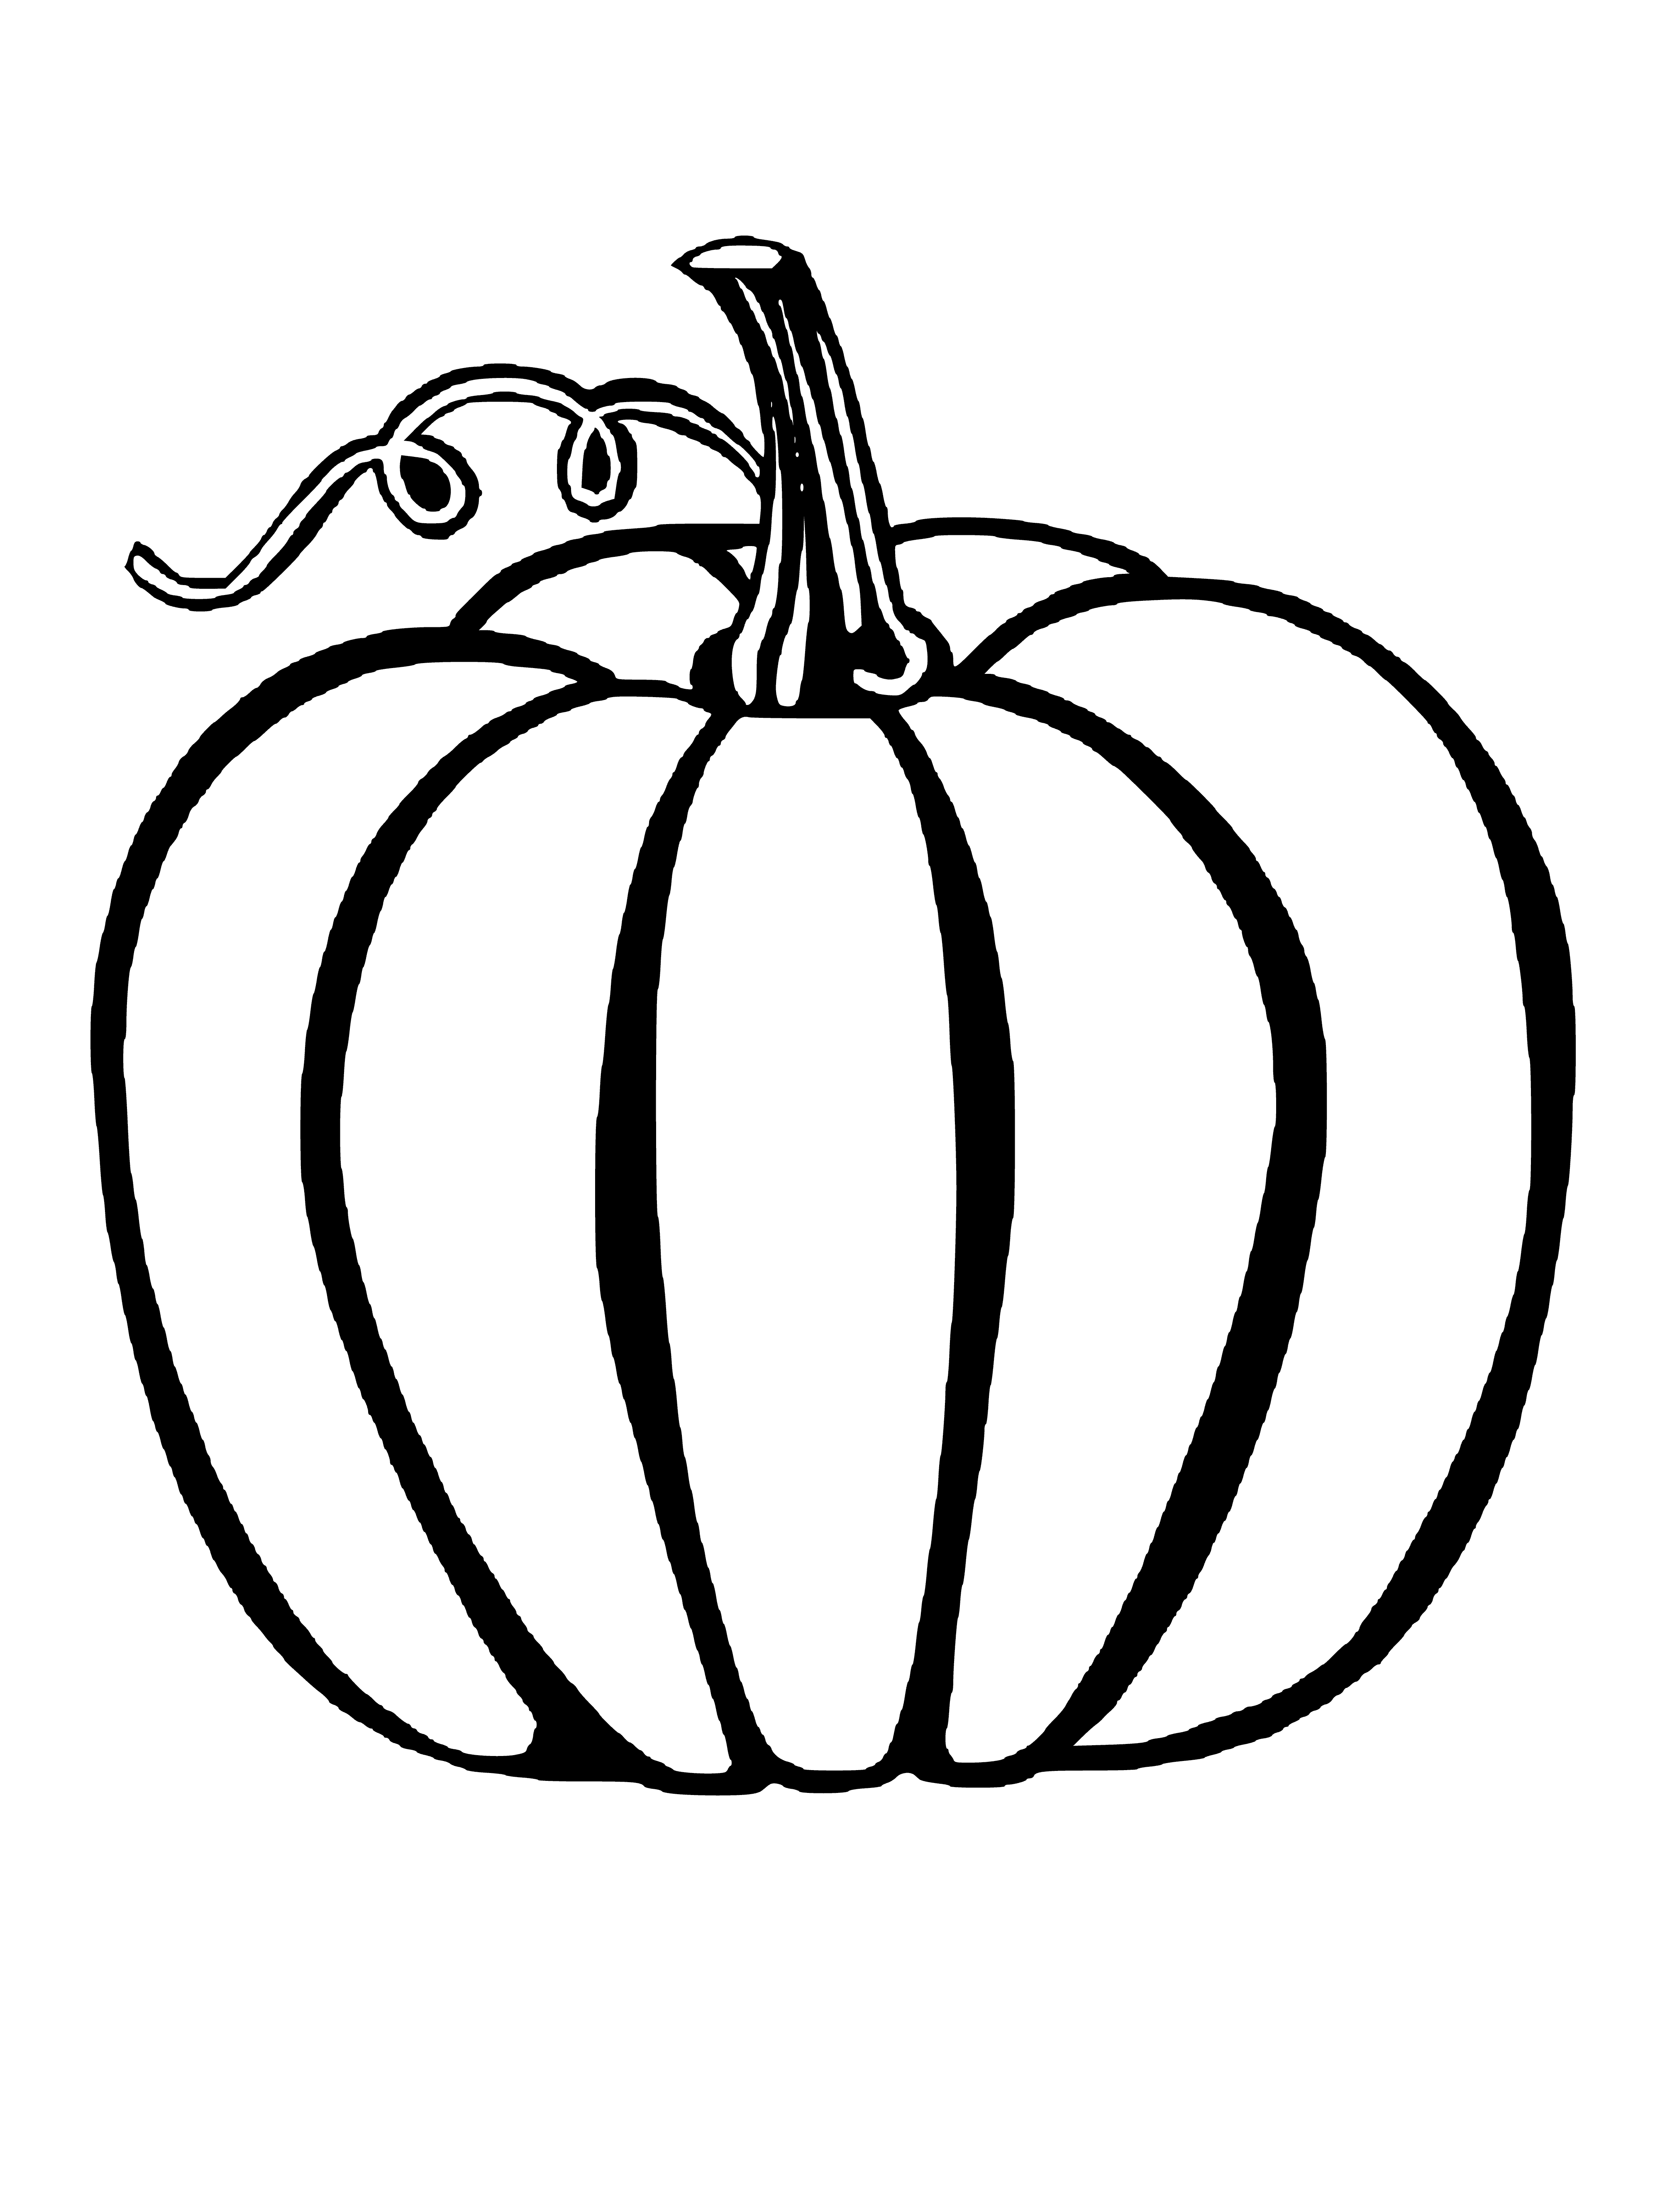 coloring page: Pumpkin lying on side with green stem; no other objects; ready to color! #pumpkin #halloween